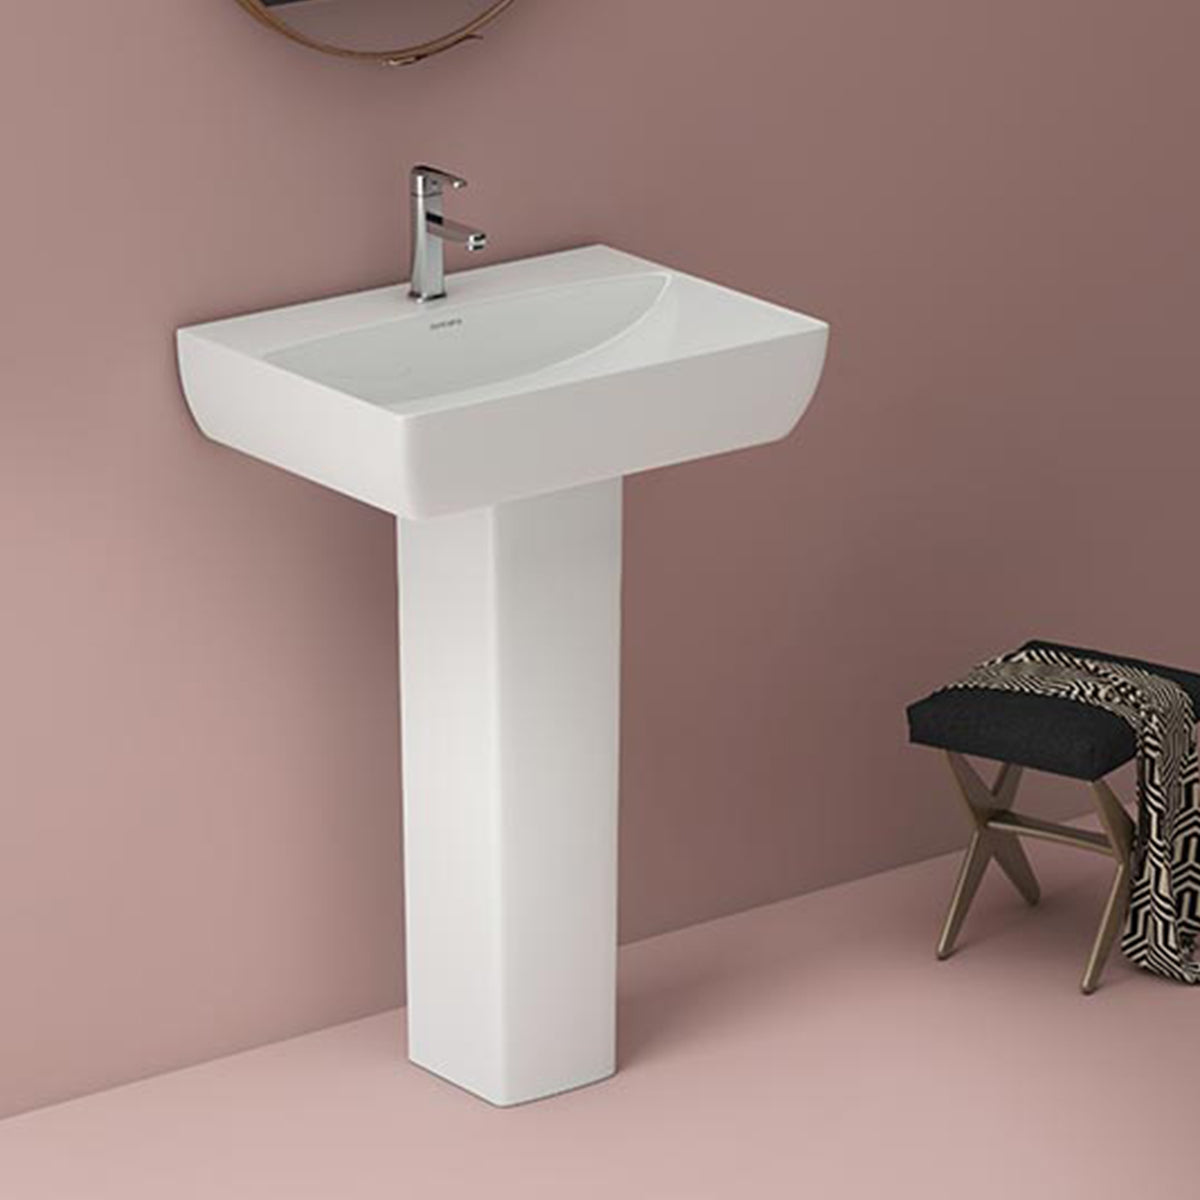 Soncera Doyle Wall Hung Basin Without Pedestal